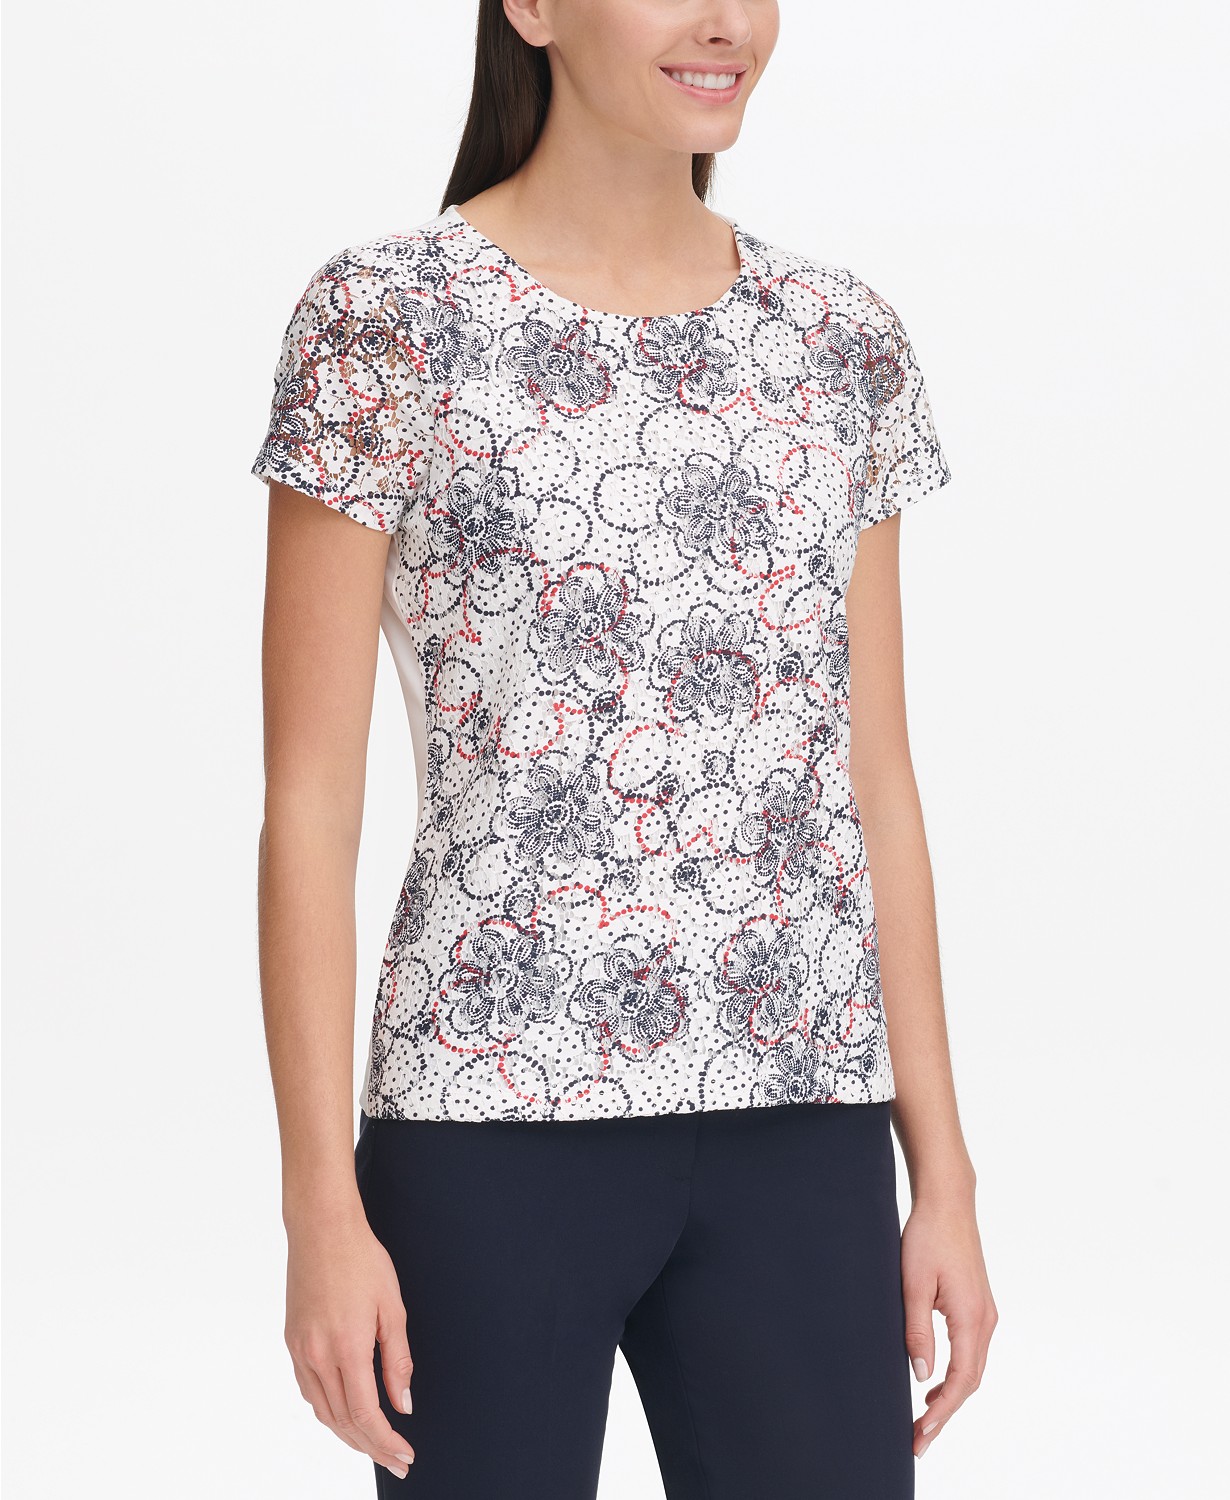 Dot Floral Printed-Lace Top